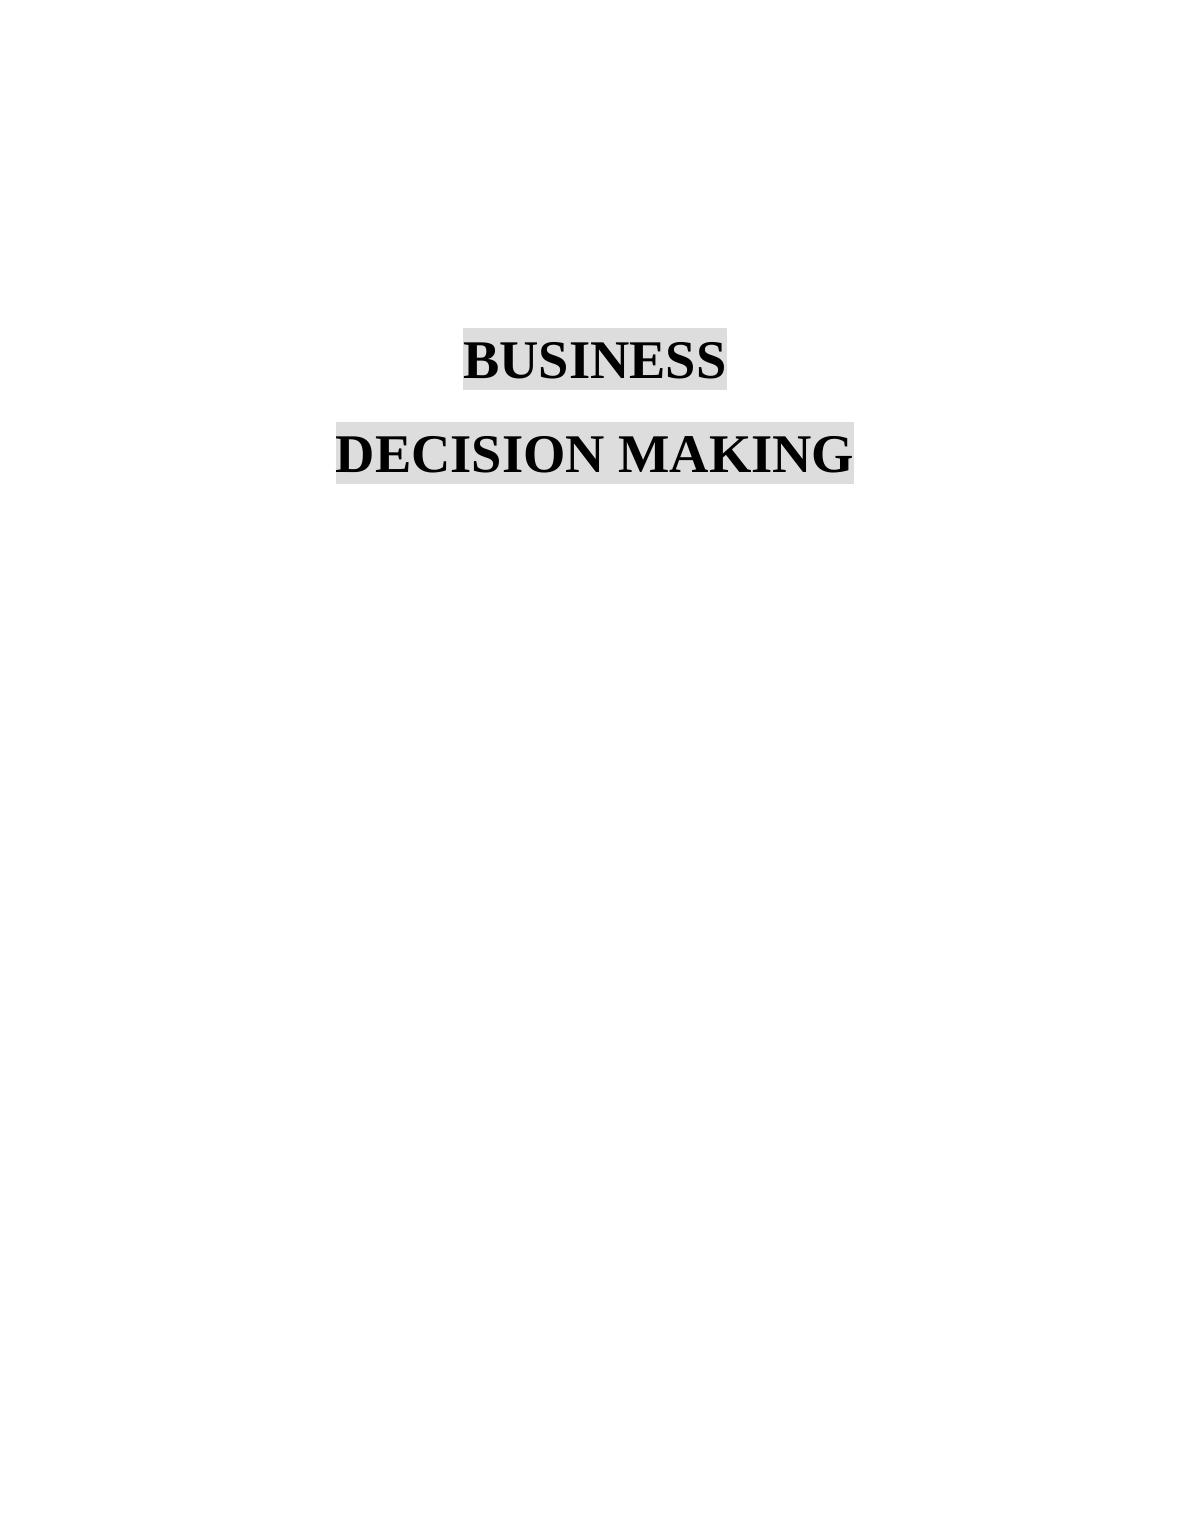 Business Decision Making (Doc)_1